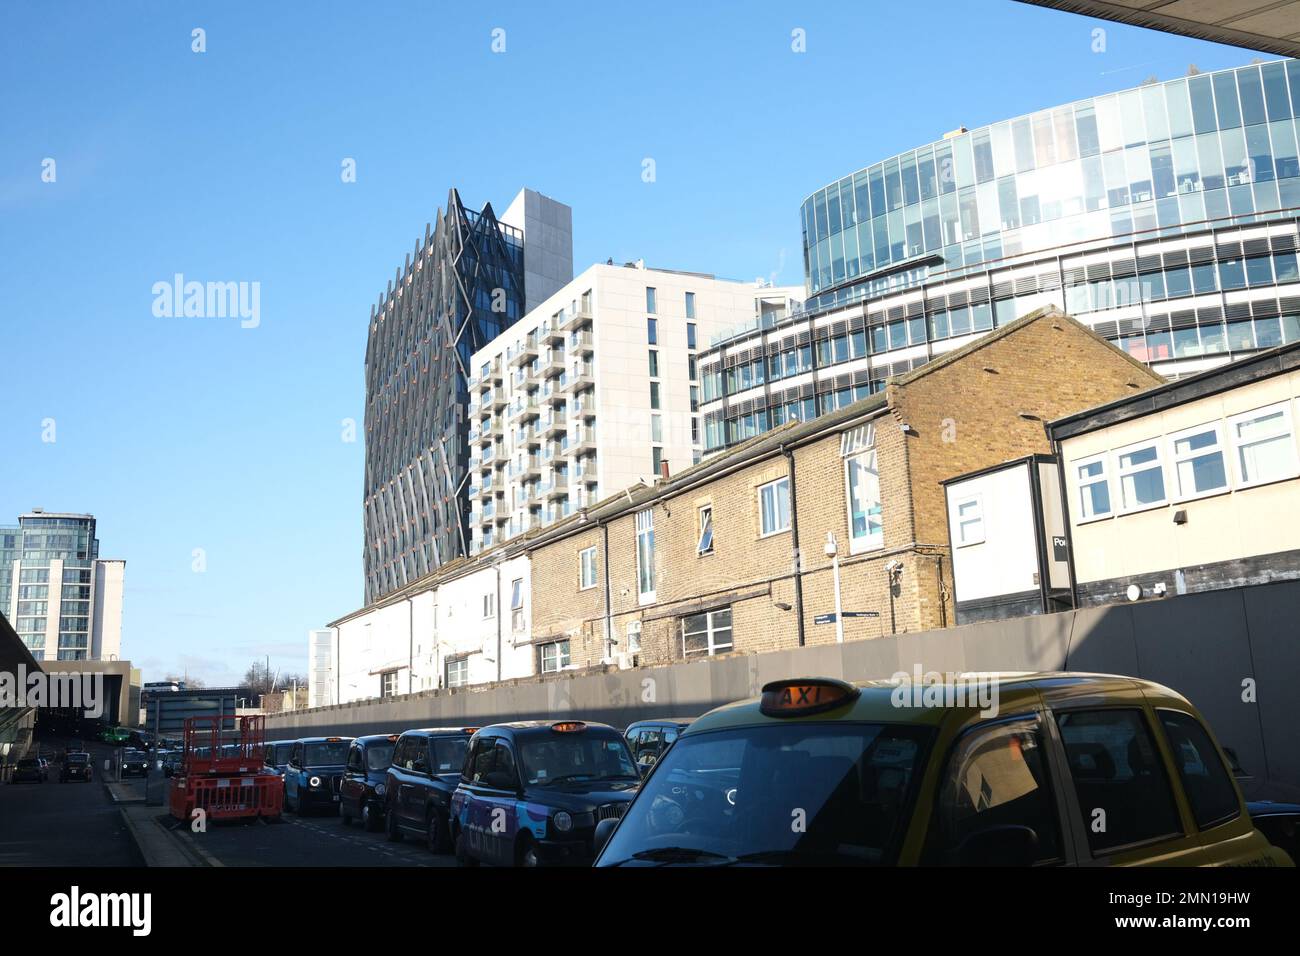 This image, taken from the Paddington Station taxi rank shows a cocktail of archtectural styes and sizes all thrown together in a small area. Stock Photo